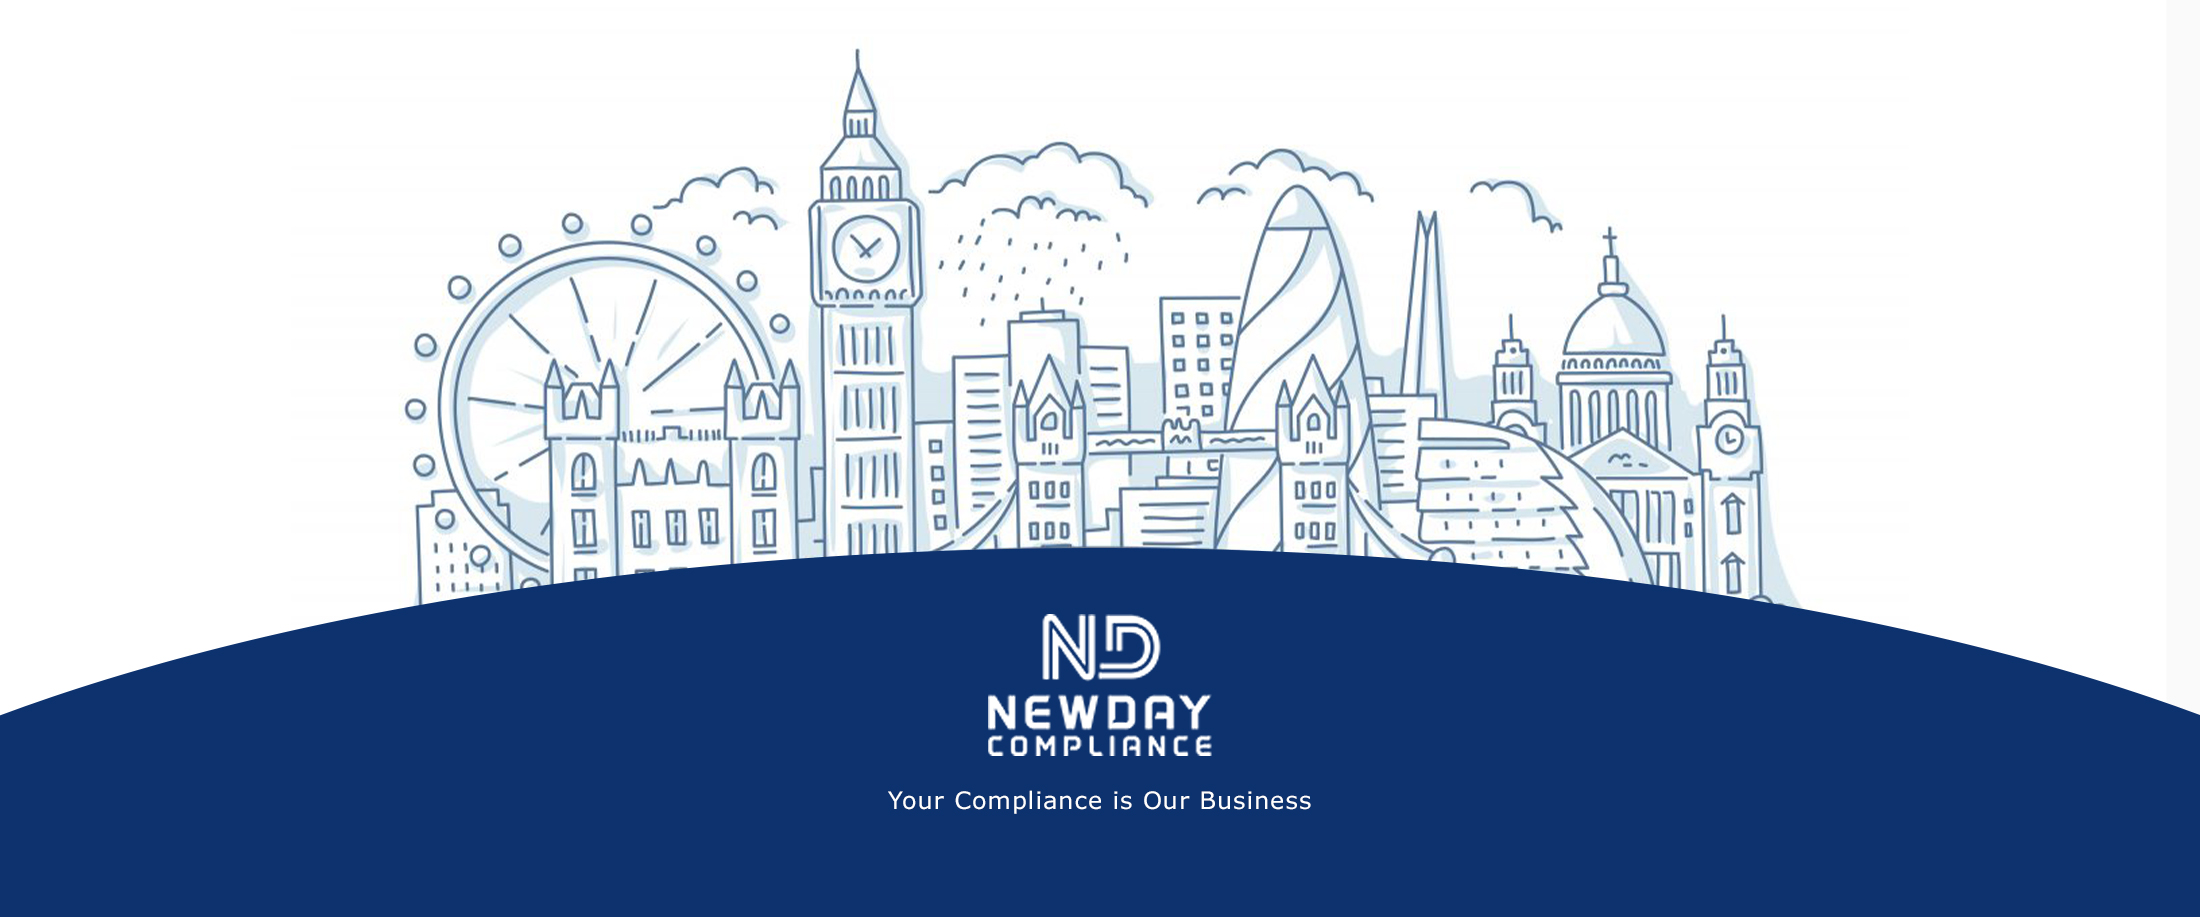 NewDay-Compliance-banner